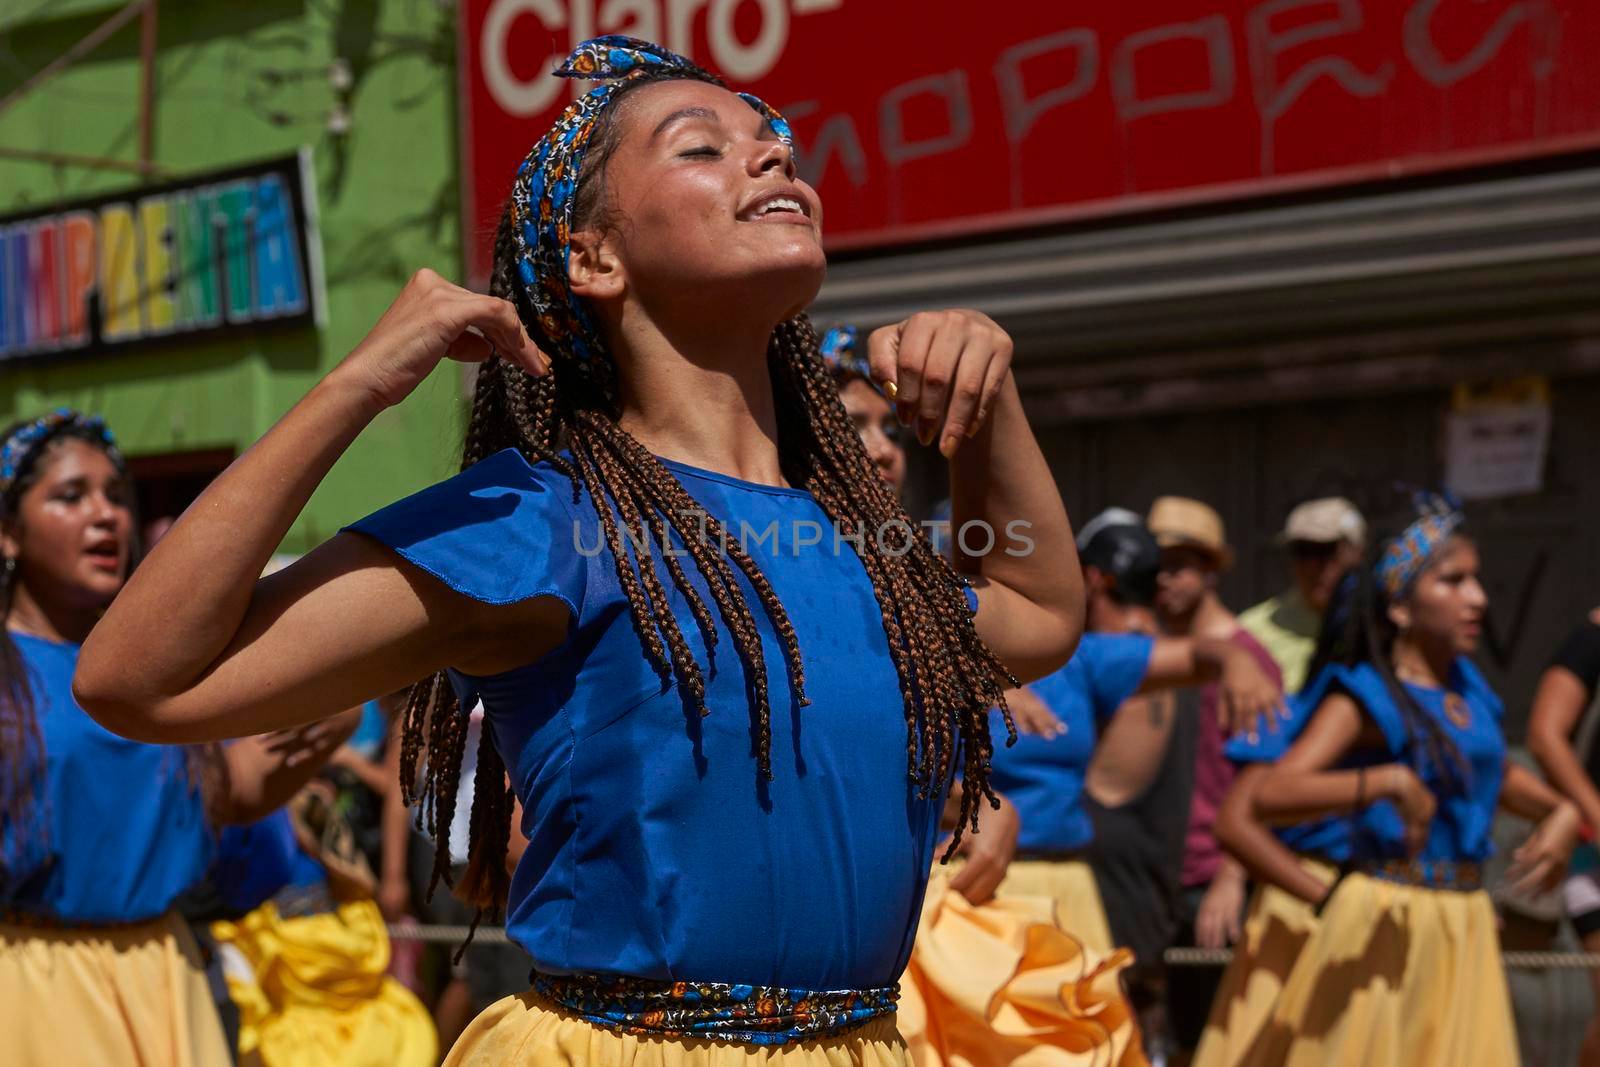 Dancers at the Arica Carnival by JeremyRichards